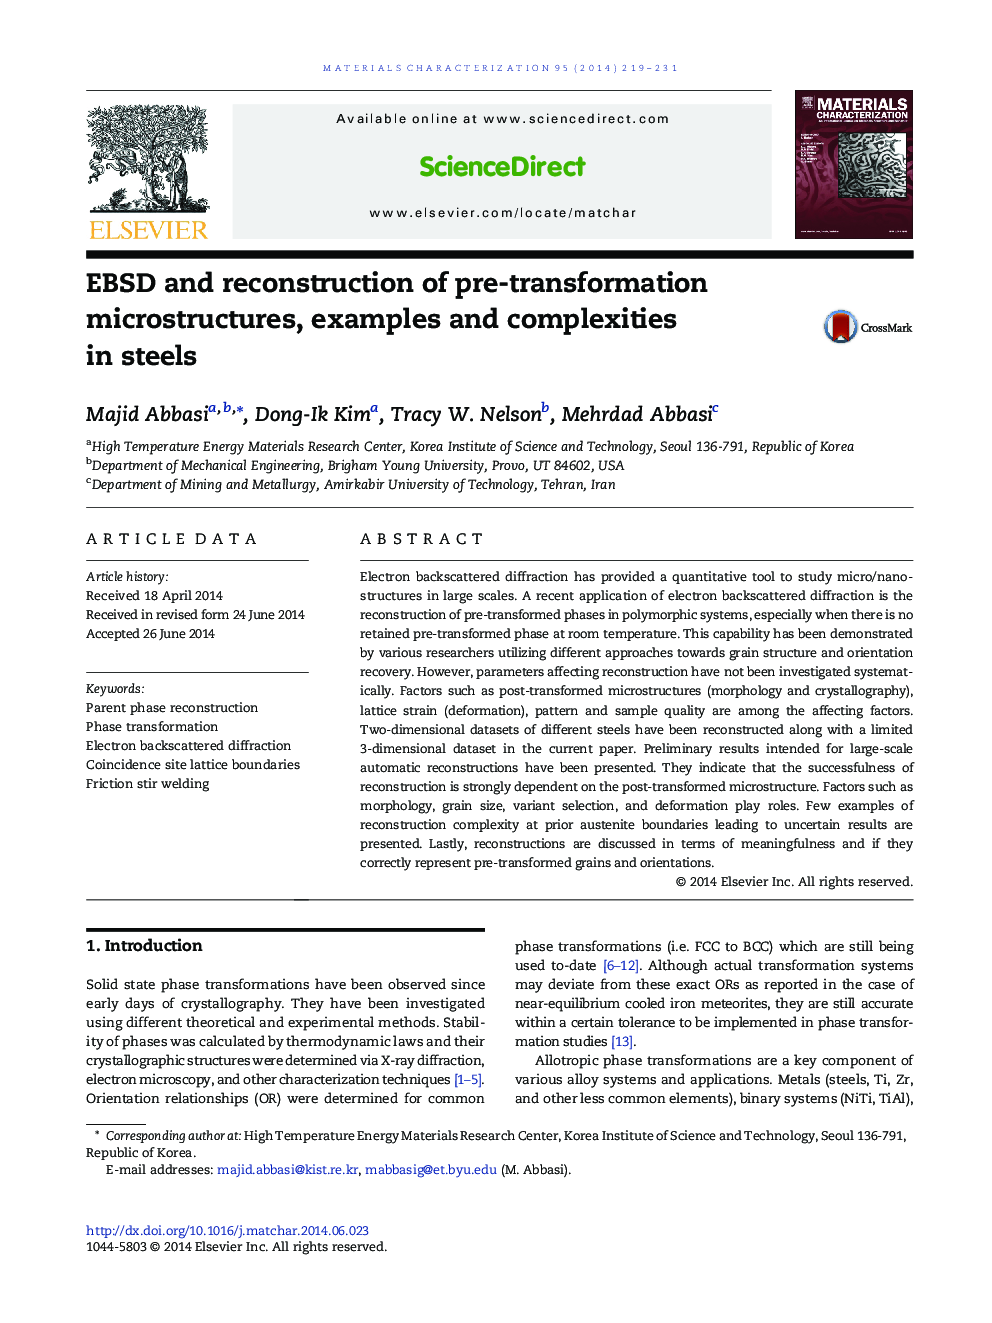 EBSD and reconstruction of pre-transformation microstructures, examples and complexities in steels